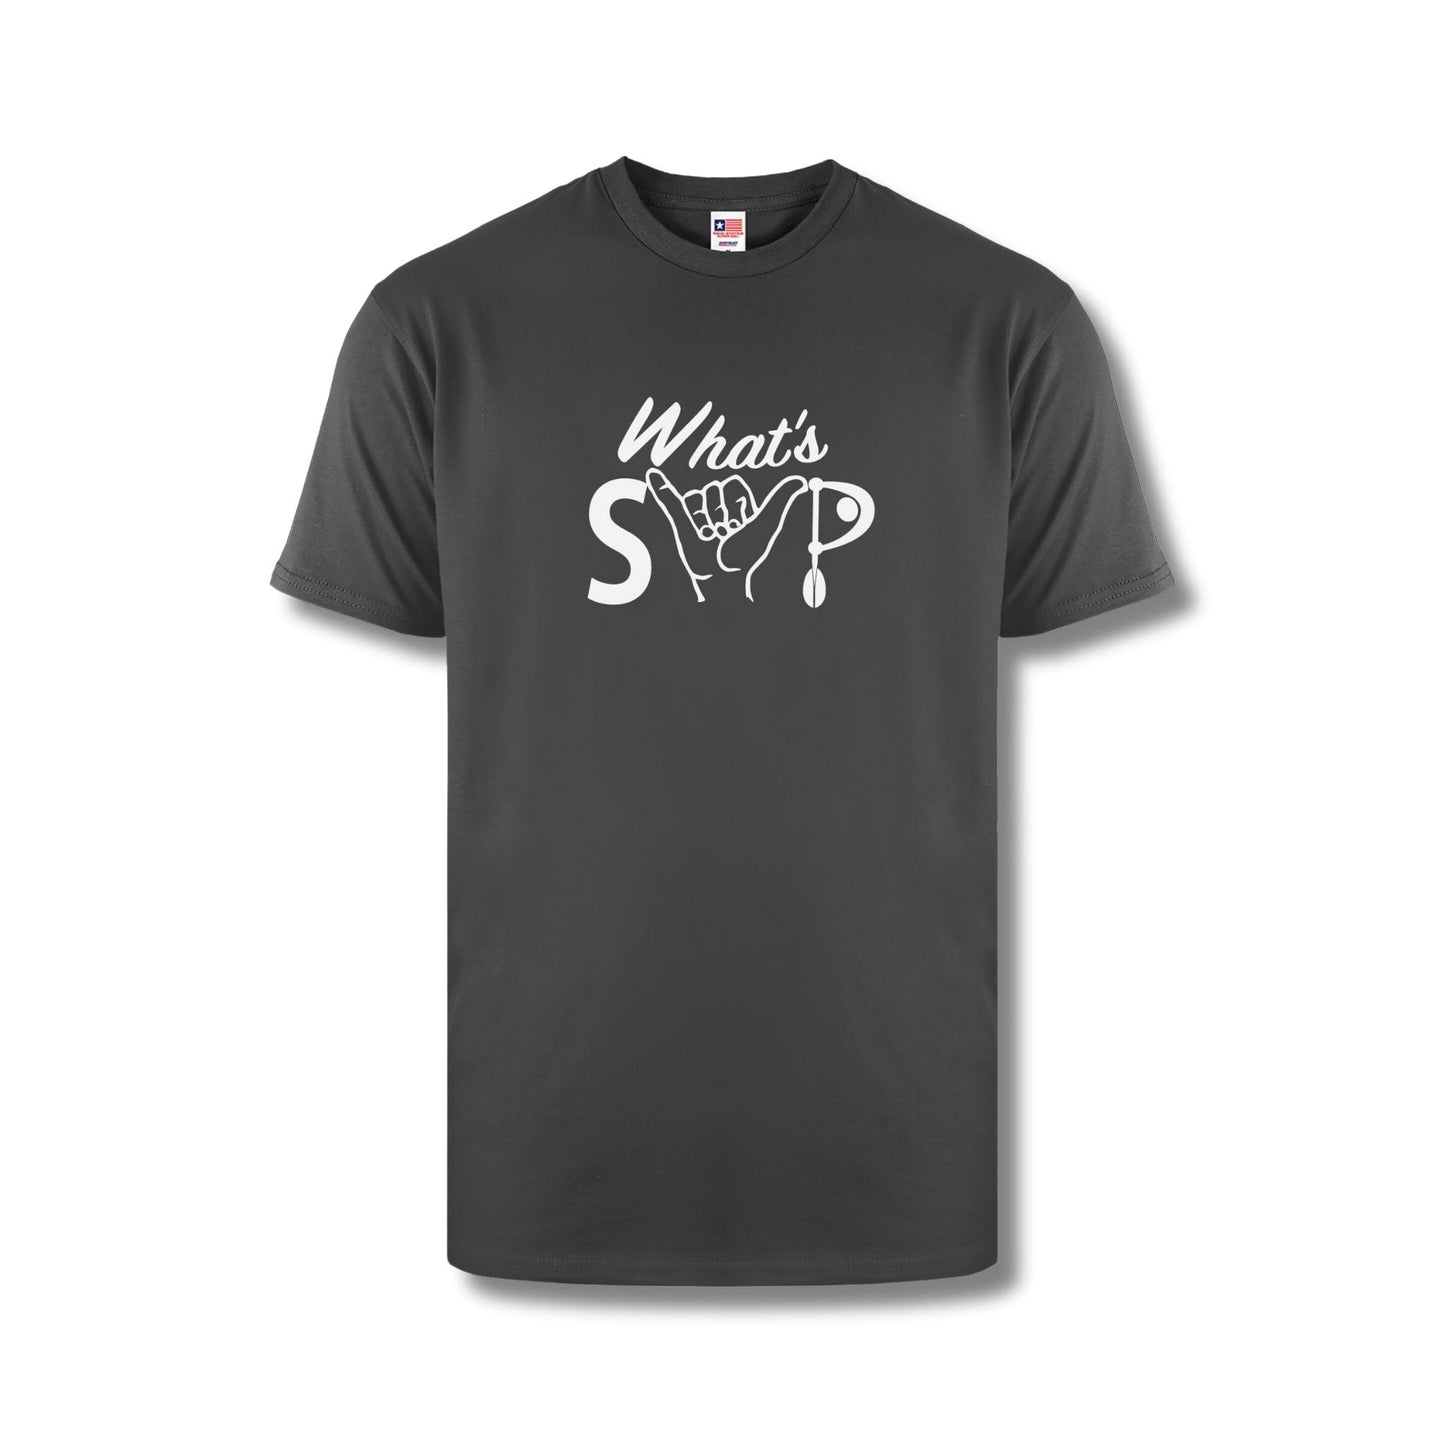 Priority SUP T-shirts | Whats UP | Unisex S,M,L,XL,XXL